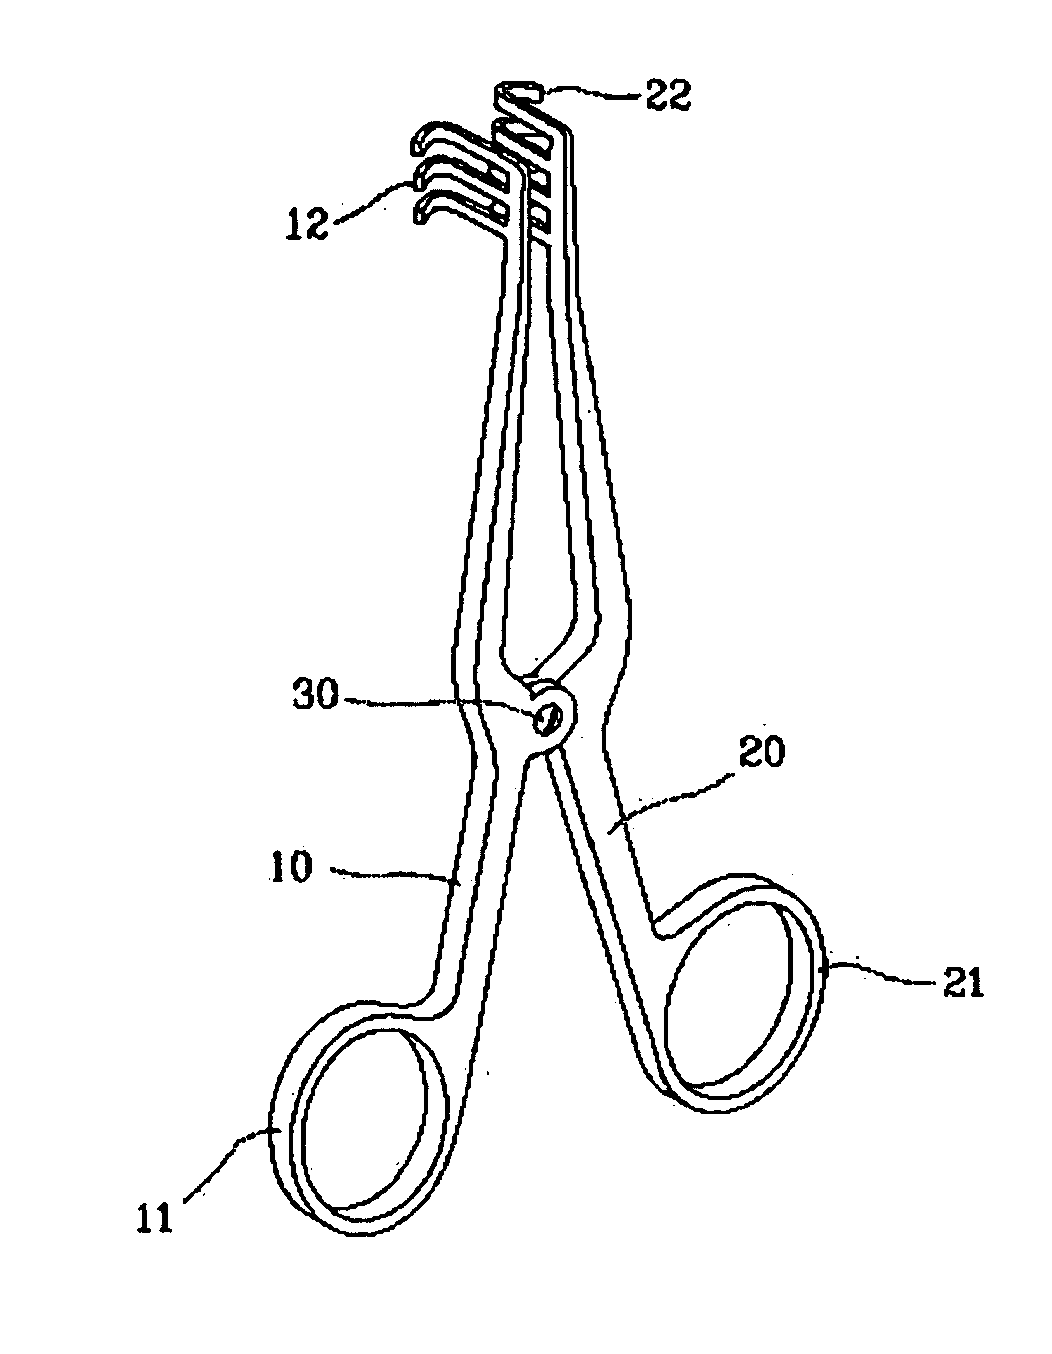 Retracting and dissecting apparatus for surgical operation, and minimal incision penile augmentation using the same